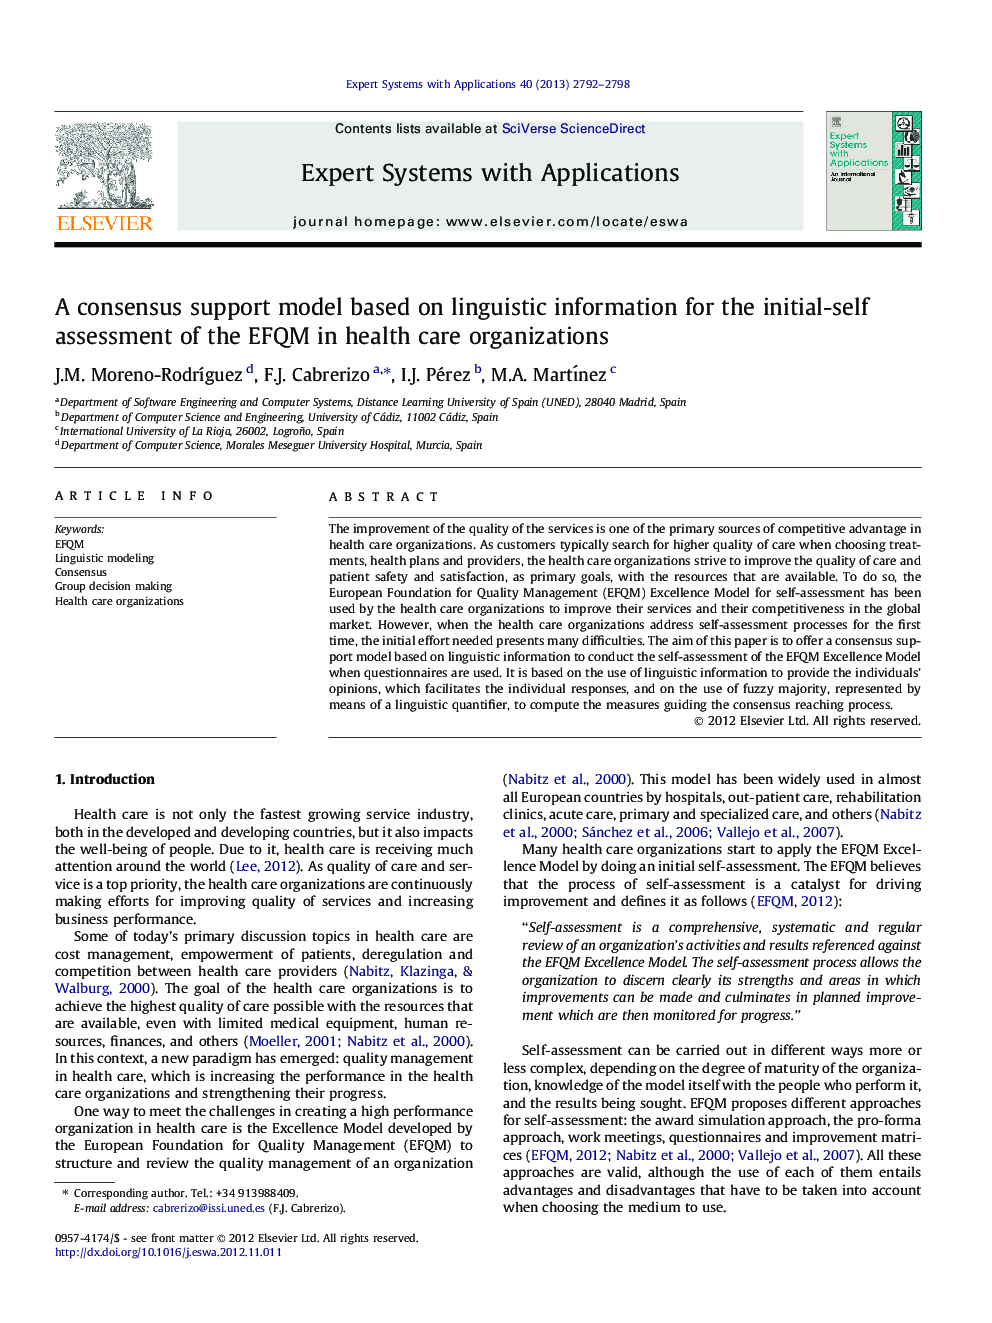 A consensus support model based on linguistic information for the initial-self assessment of the EFQM in health care organizations